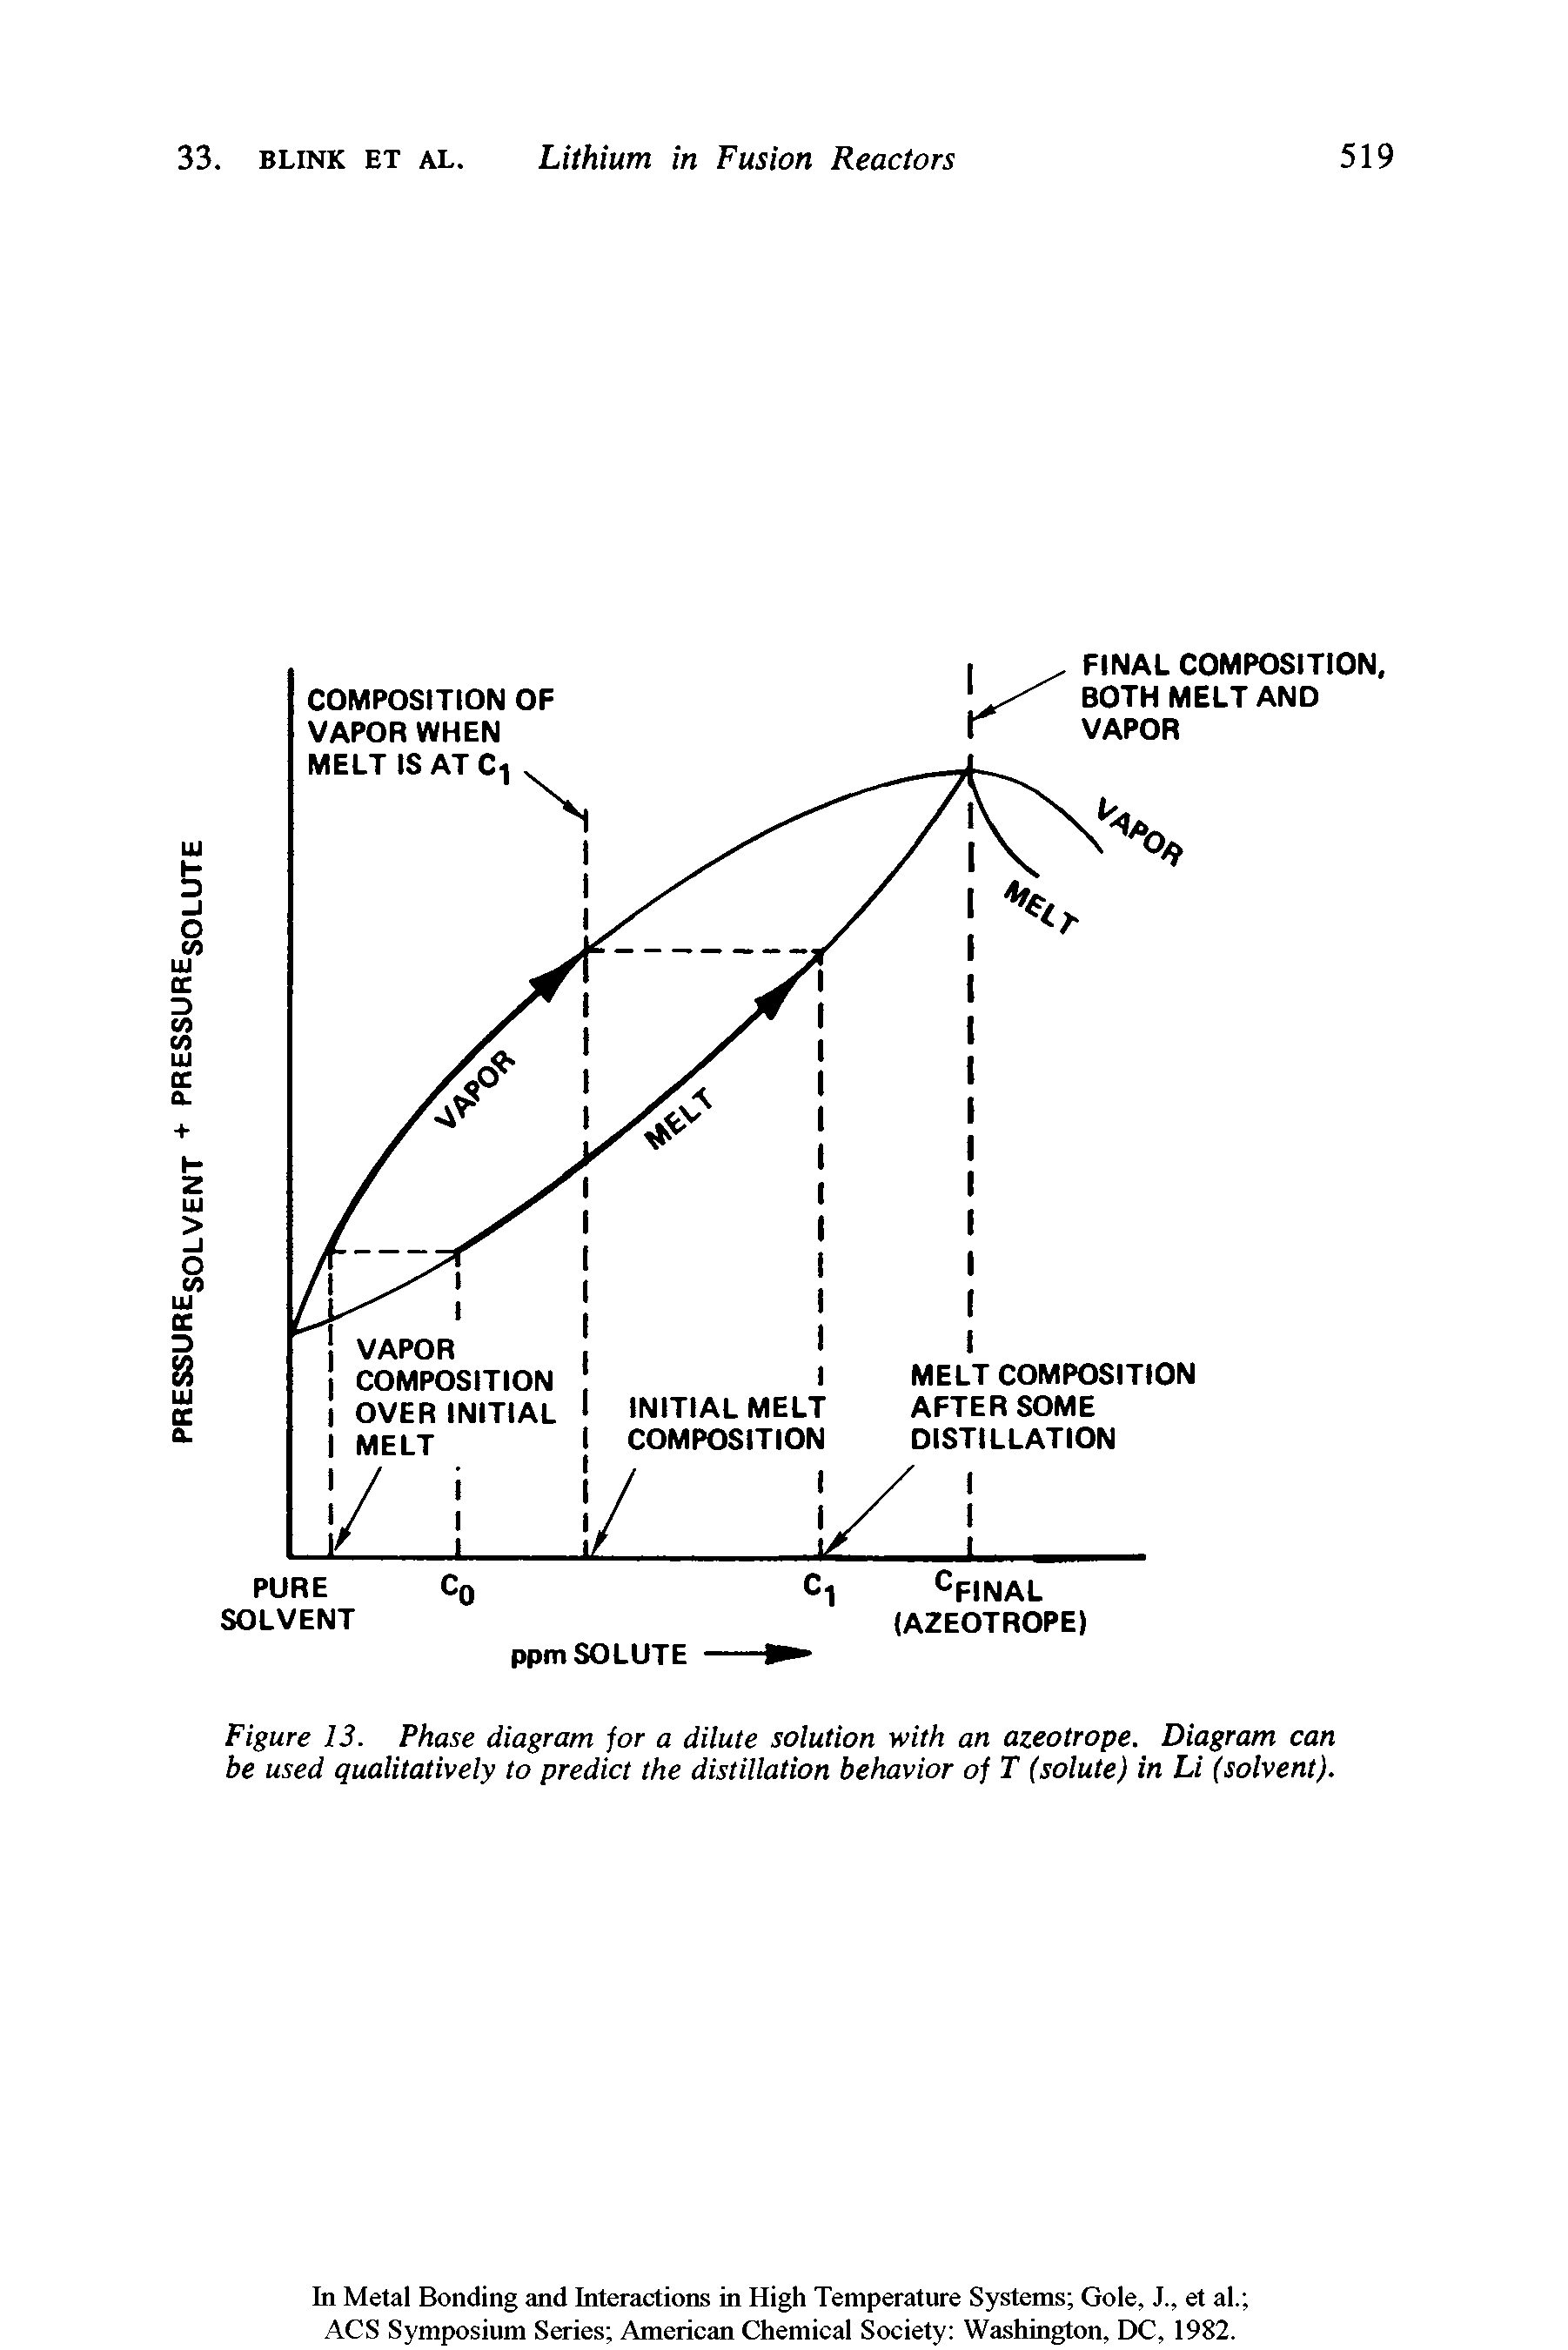 Figure 13. Phase diagram jor a dilute solution with an azeotrope. Diagram can be used qualitatively to predict the distillation behavior of T (solute) in Li (solvent).